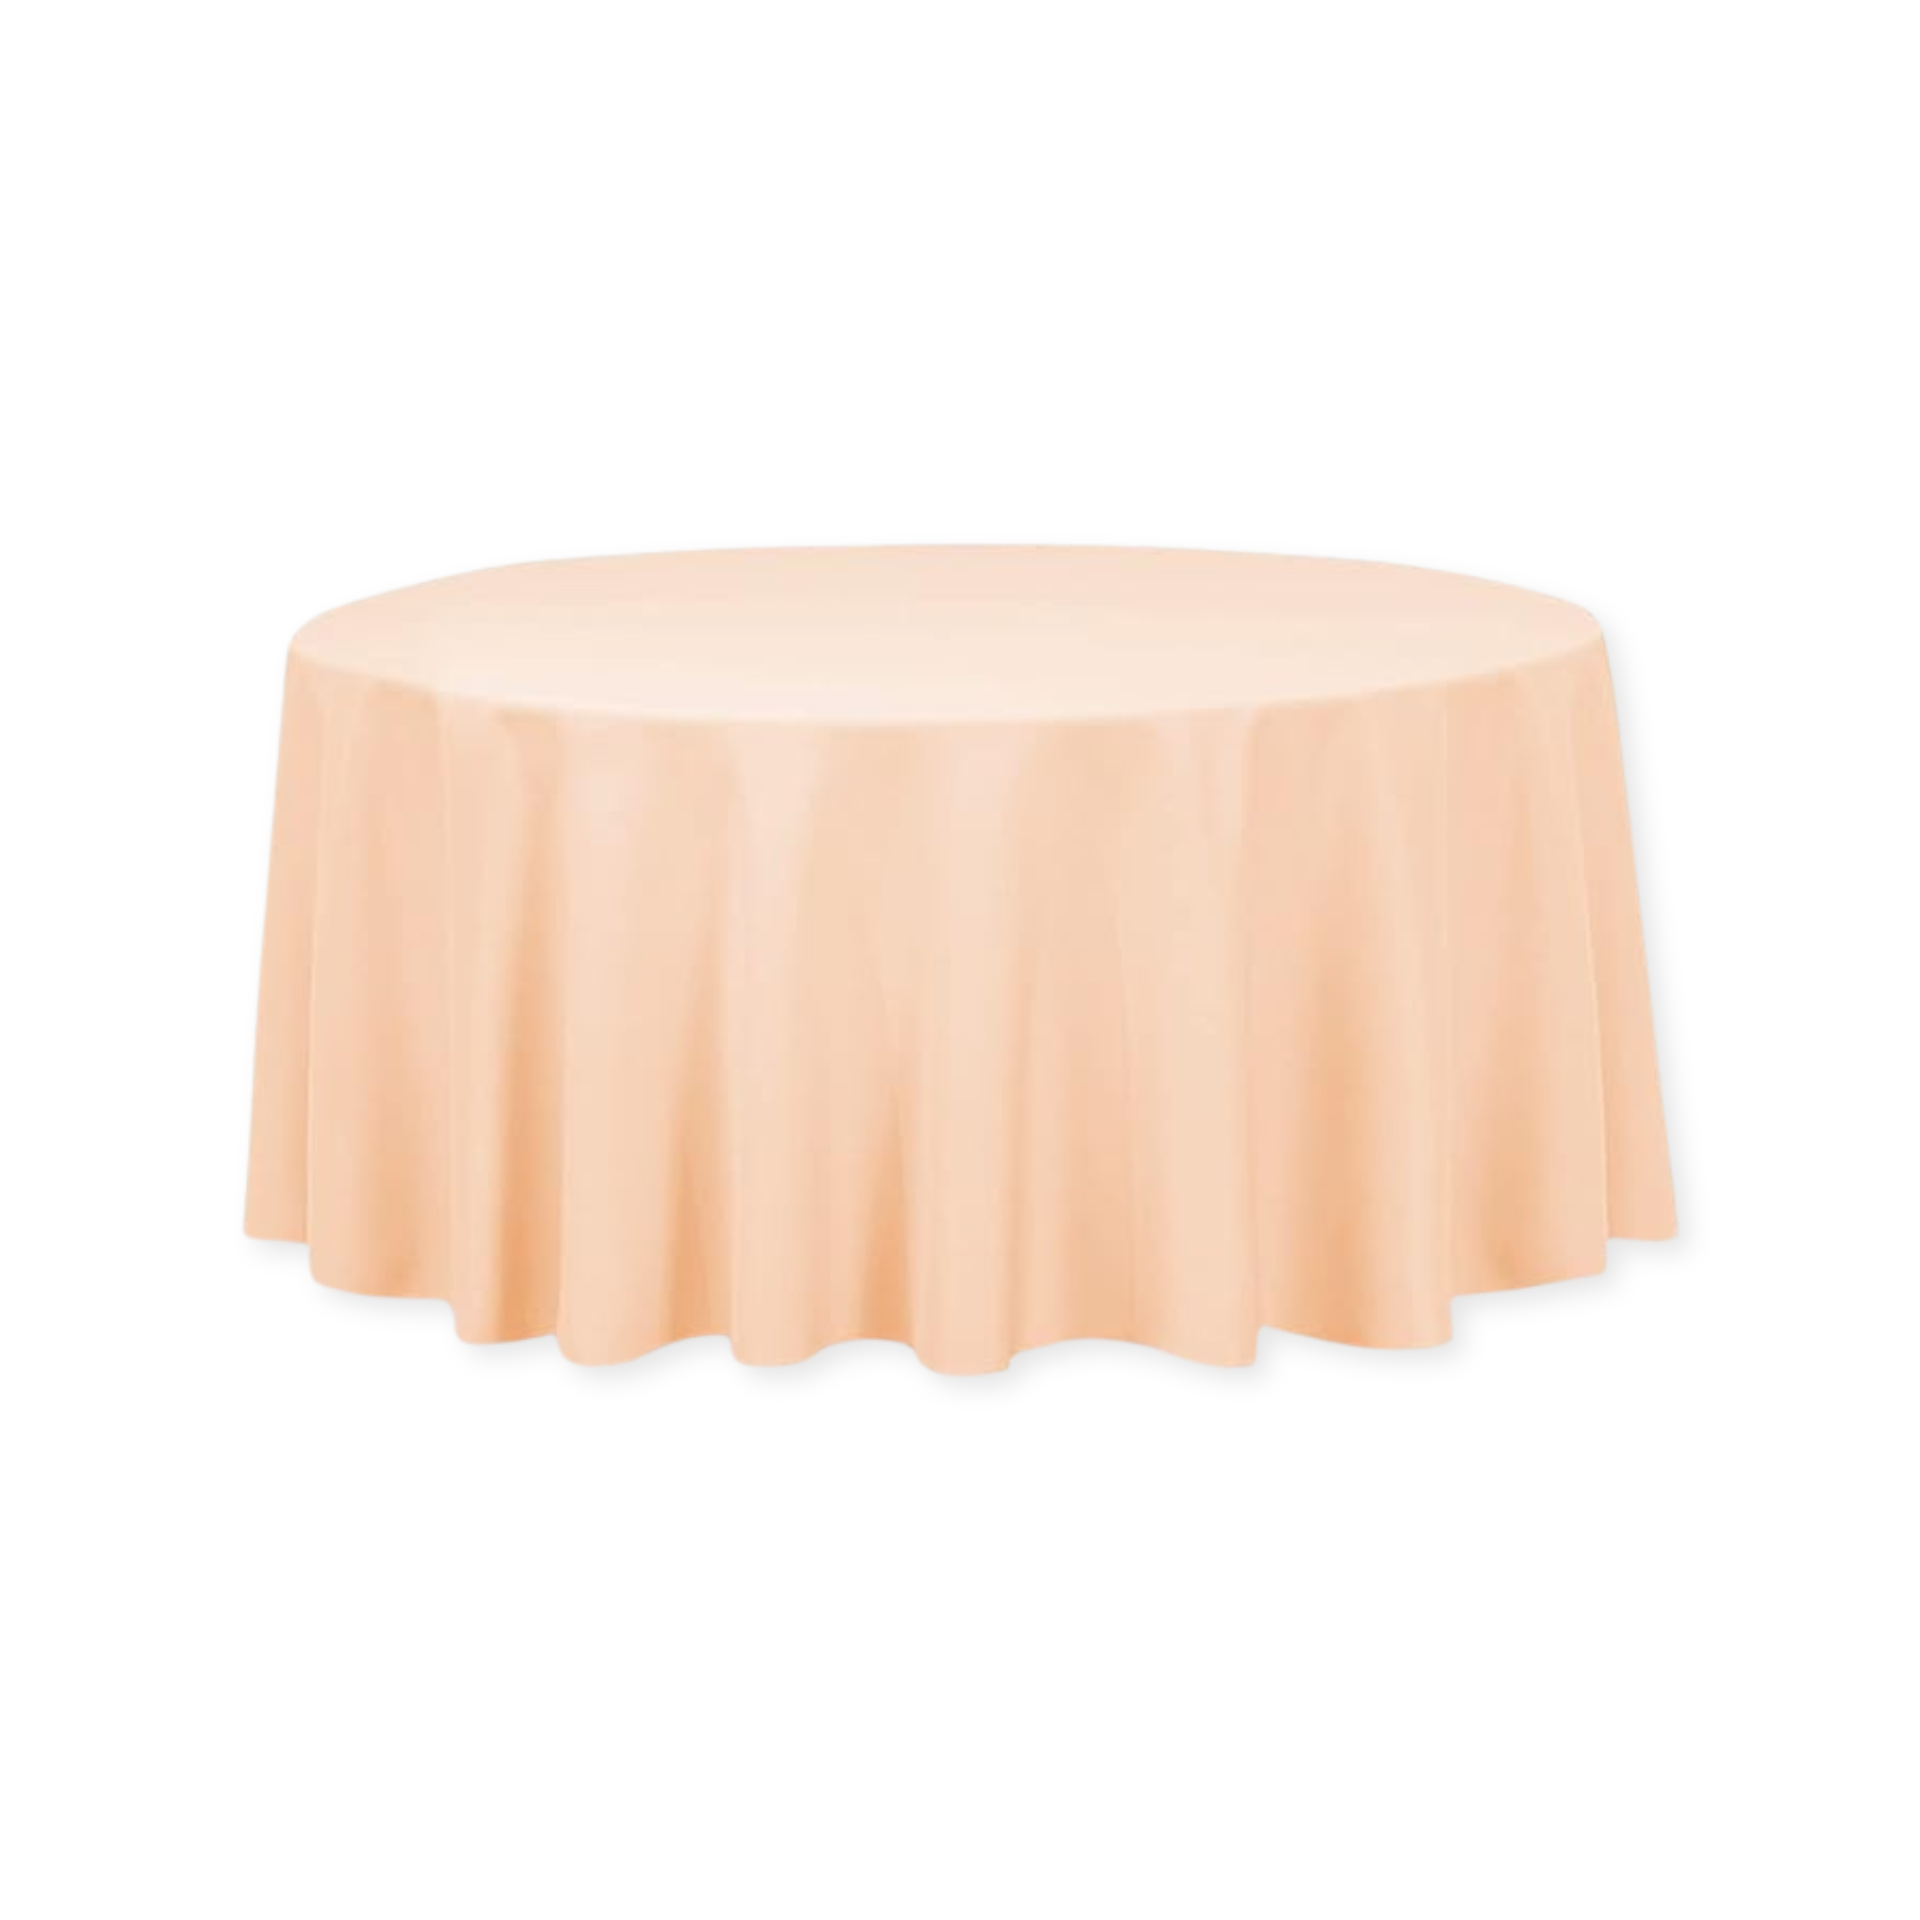 Tablecloth polyester round cantaloupe  commercial grade wedding party event rental panama city beach